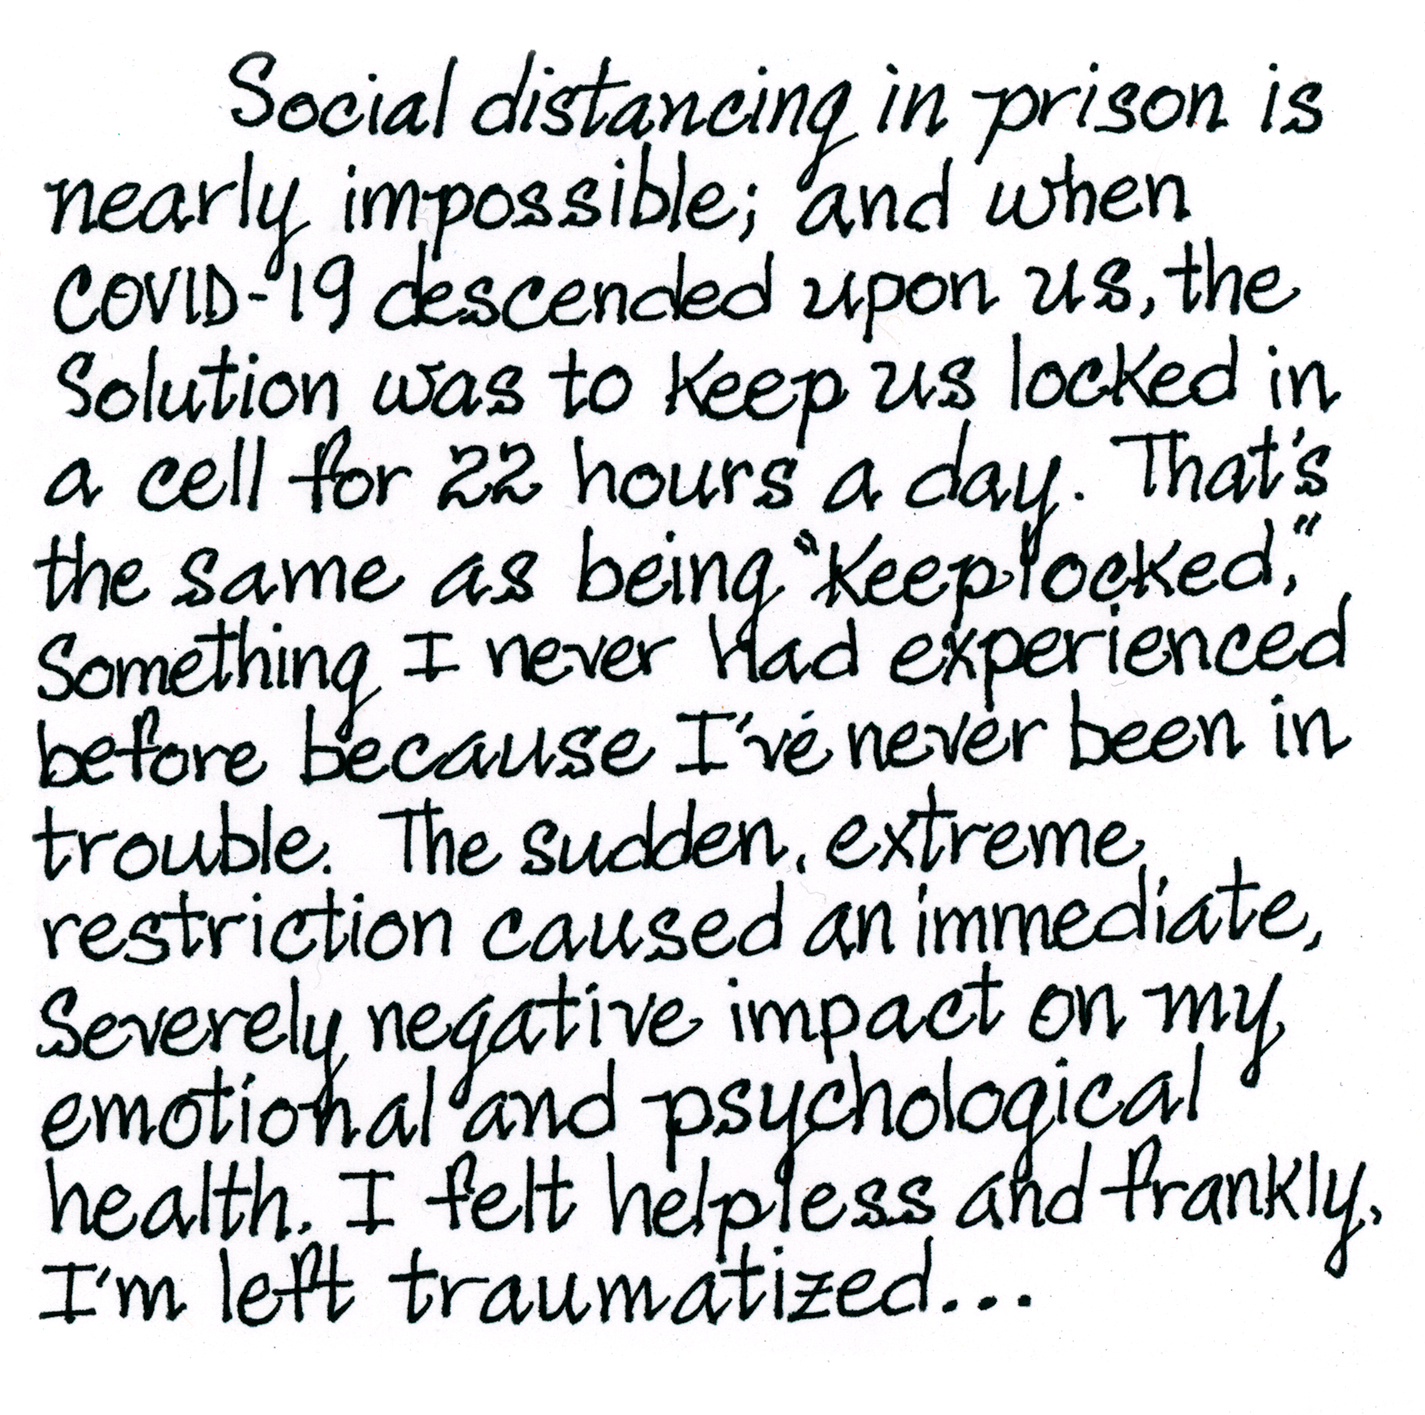 A handwritten note from Trinity: “Social distancing in prison is nearly impossible, so the solution has been to keep us locked in a cell 22 hours a day. That’s the same as being “keeplocked,” something I never had experienced before because I’ve never been in trouble. The sudden, extreme restriction caused an immediate, severely negative impact on my emotional and psychological health. I feel helpless and frankly, traumatized…”